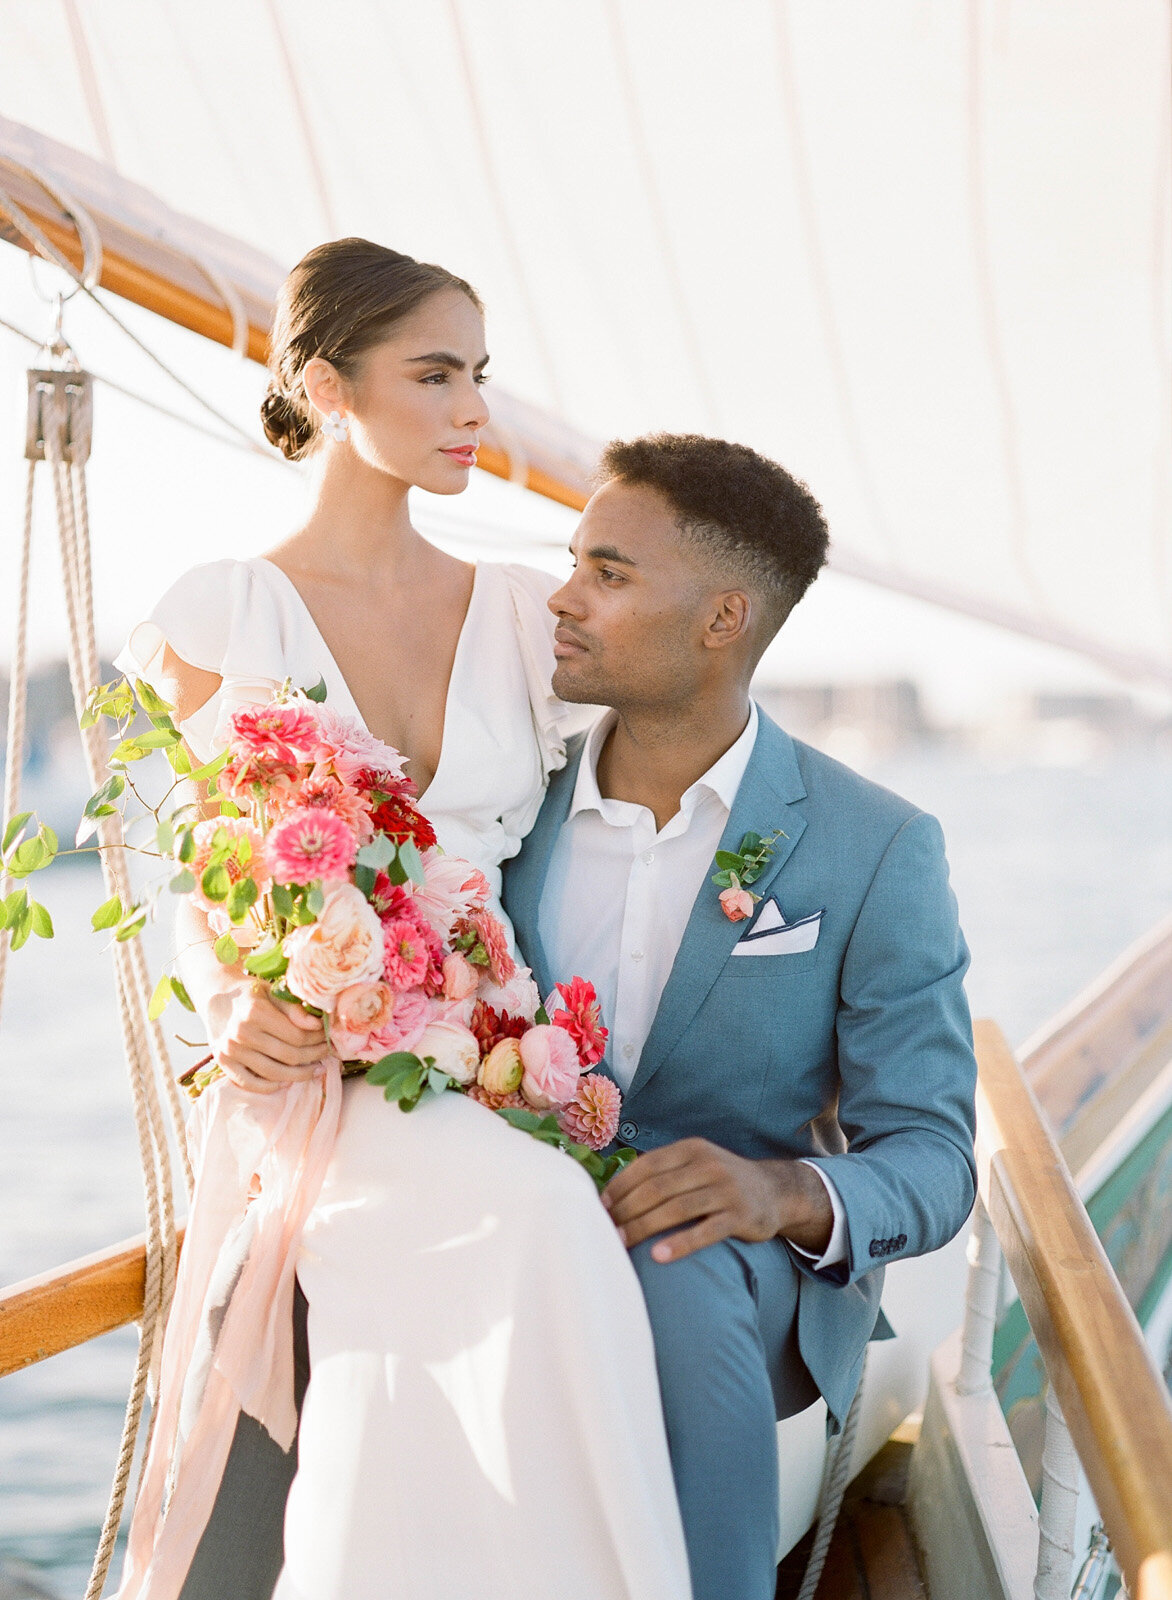 Kate-Murtaugh-Events-elopement-wedding-planner-Boston-Harbor-sailing-sail-boat-yacht-greenery-water-skyline-couple-bouquet